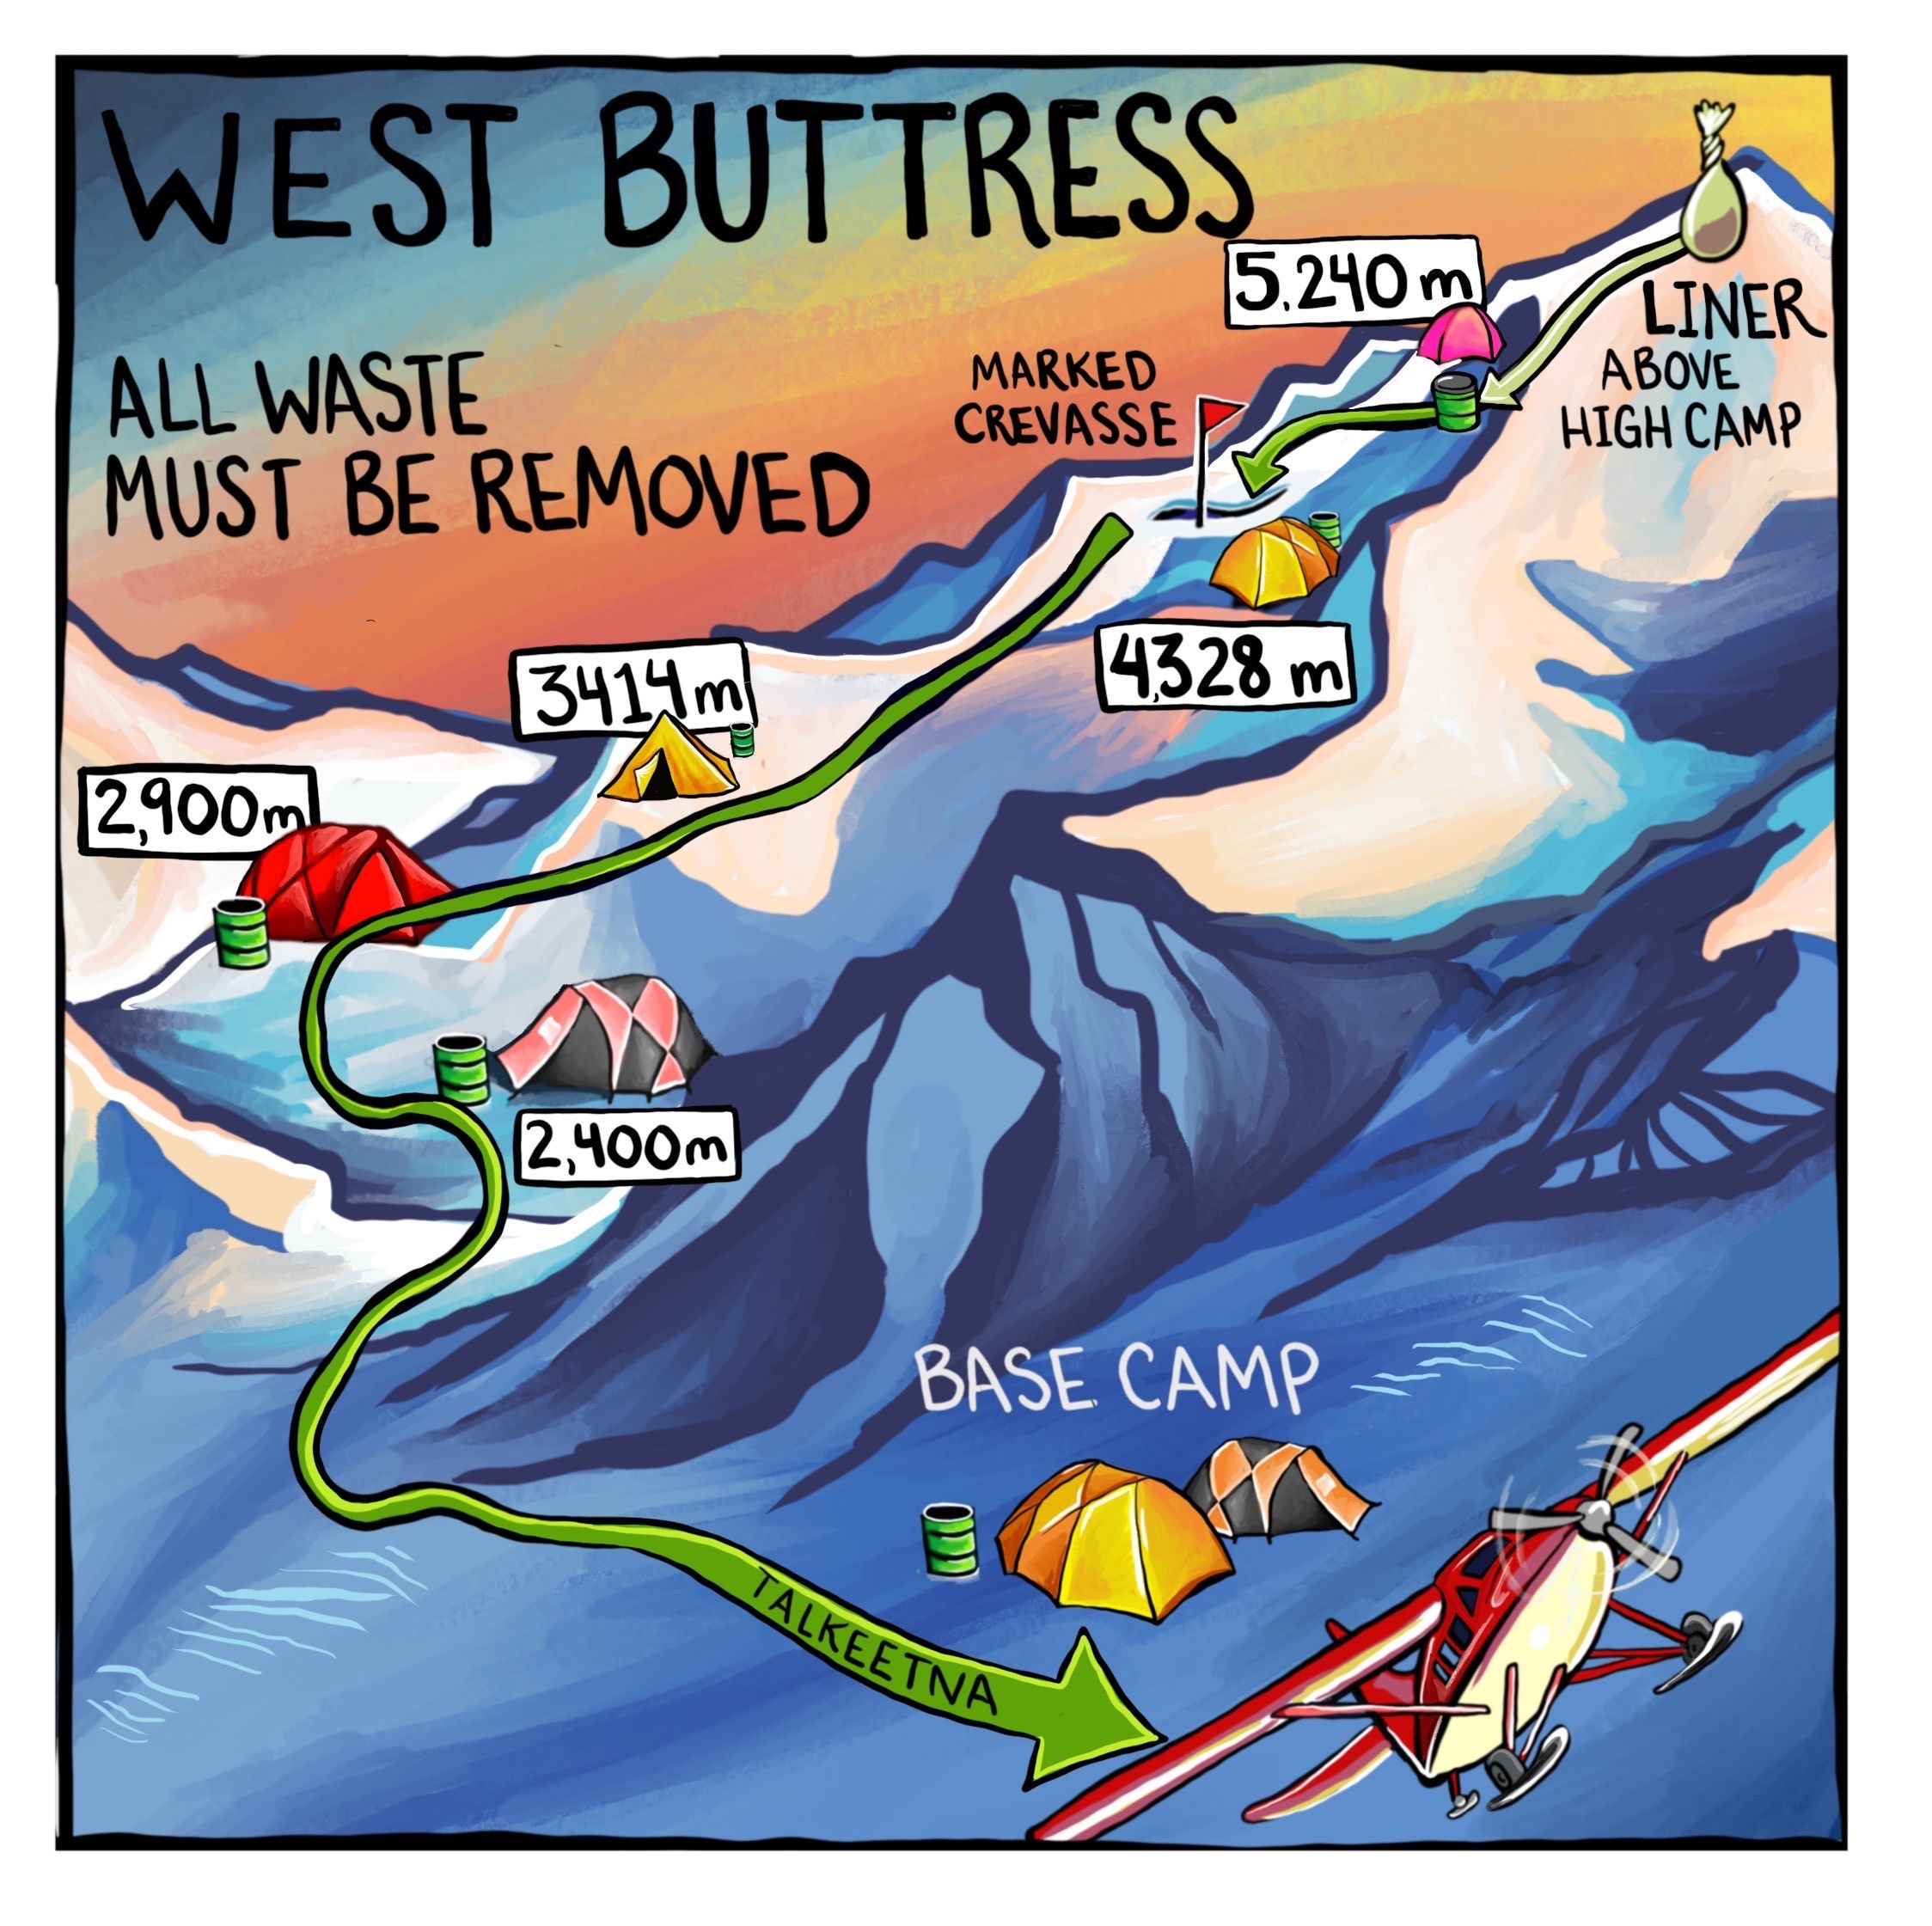 Colorful Graphic of West Buttress climbing route with elevation markers